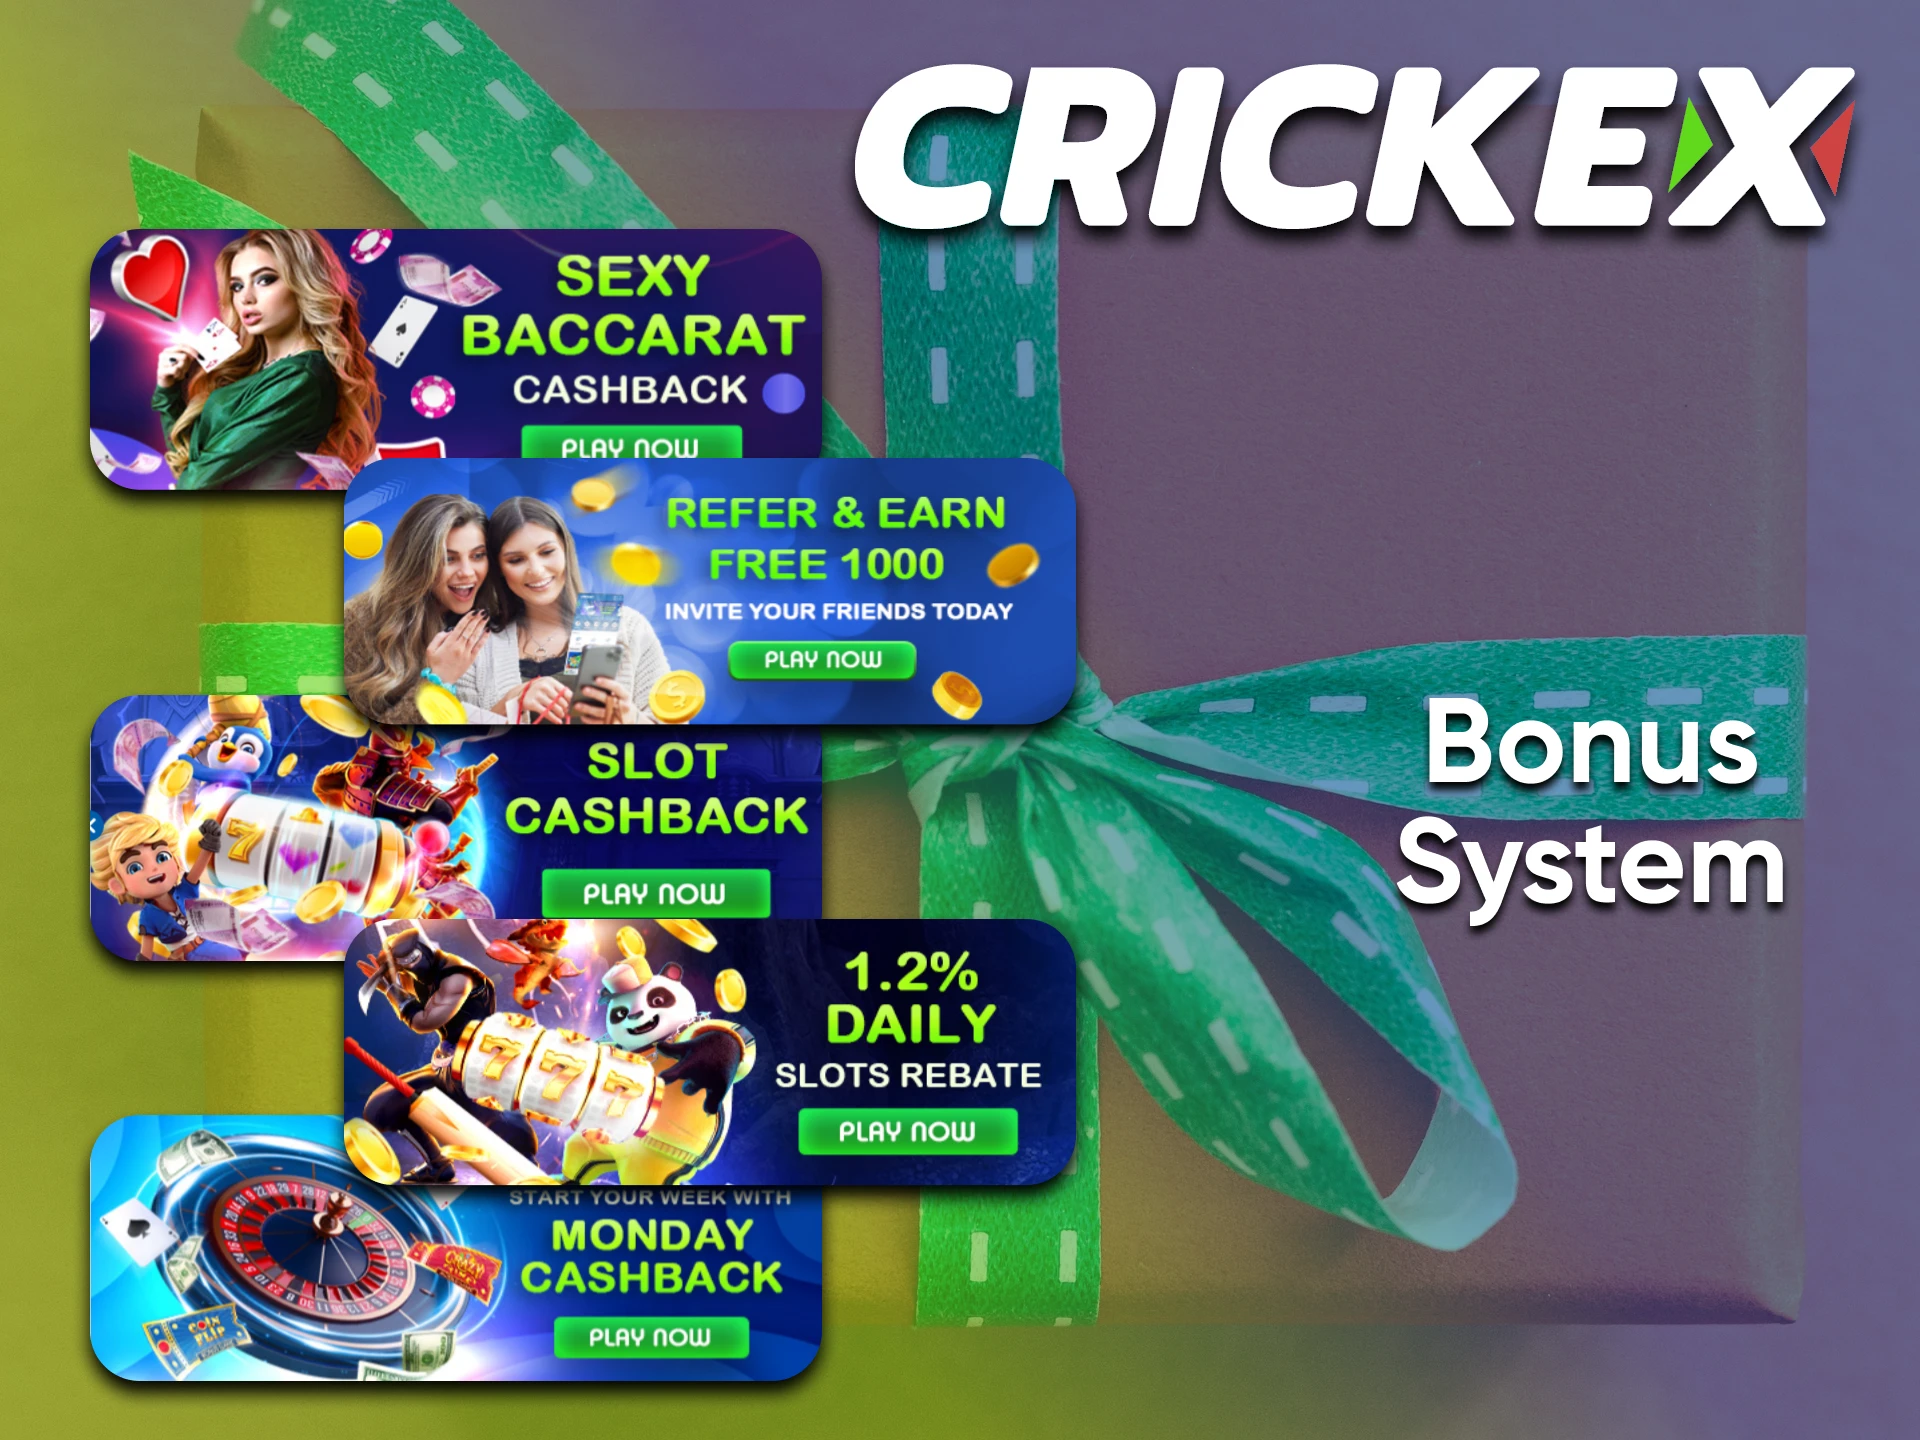 There are many bonuses for players in Crickex.